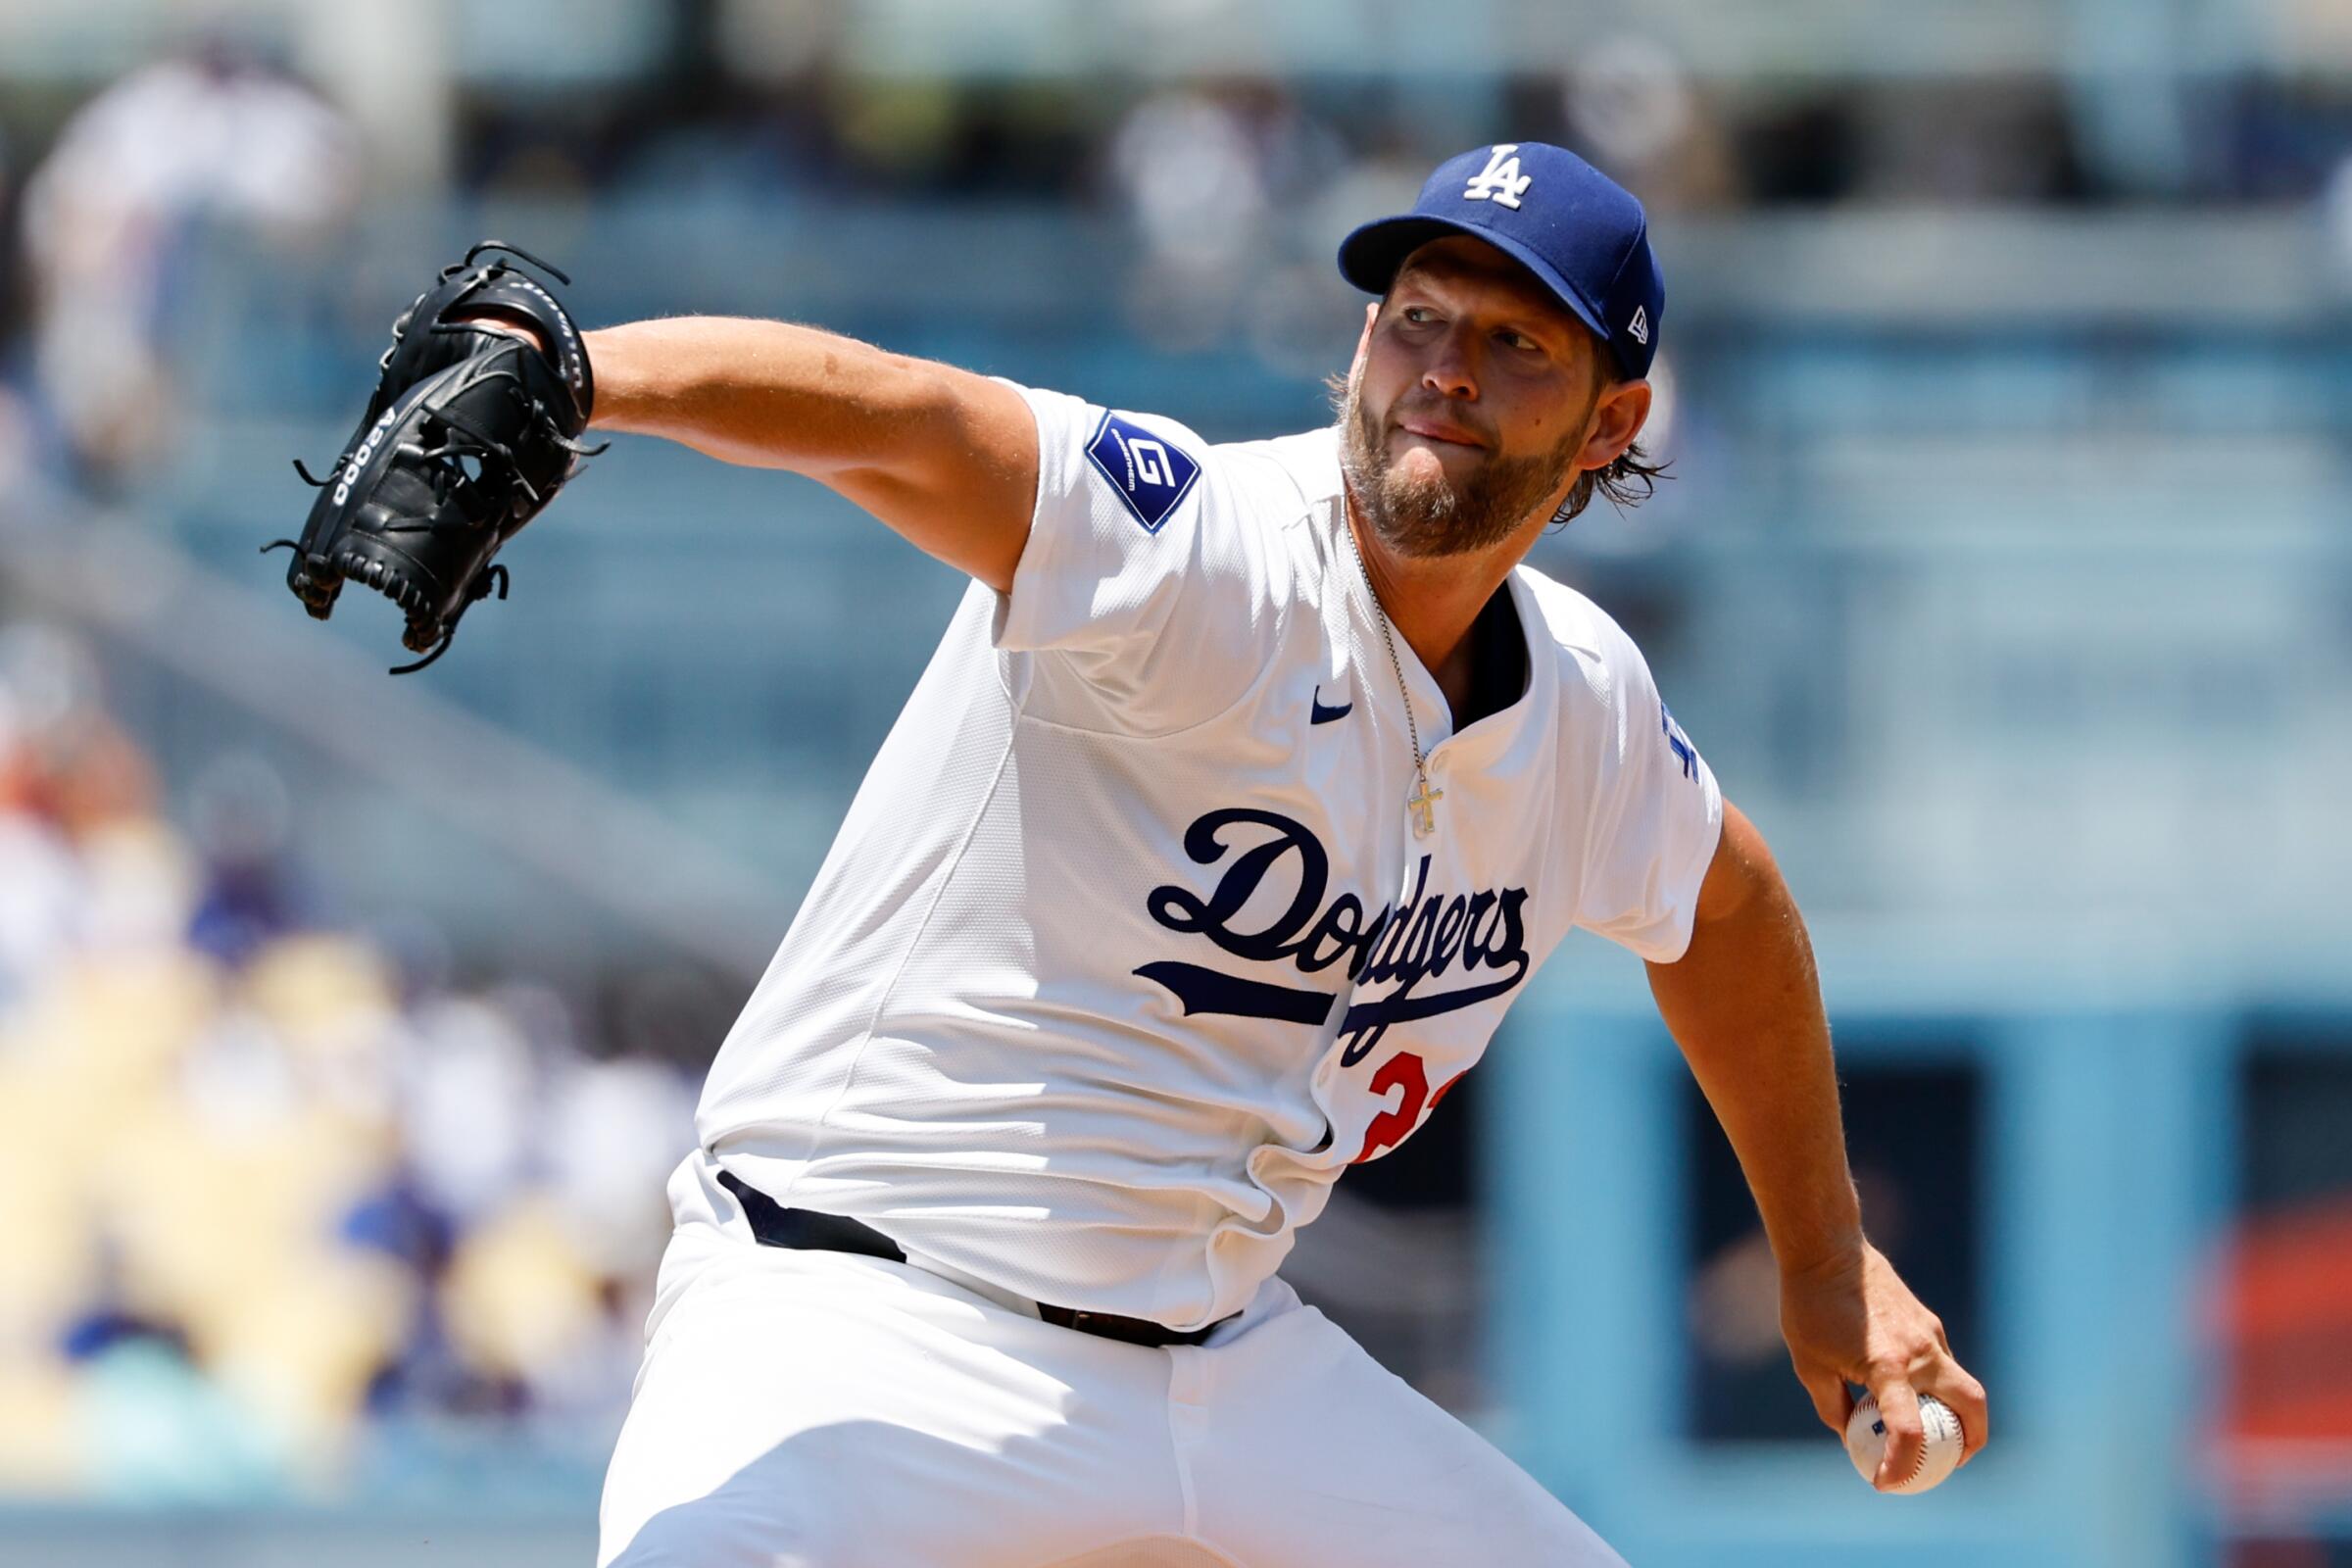 Dodgers left-hander Clayton Kershaw holds a splitter grip as he pitches in a home uniform